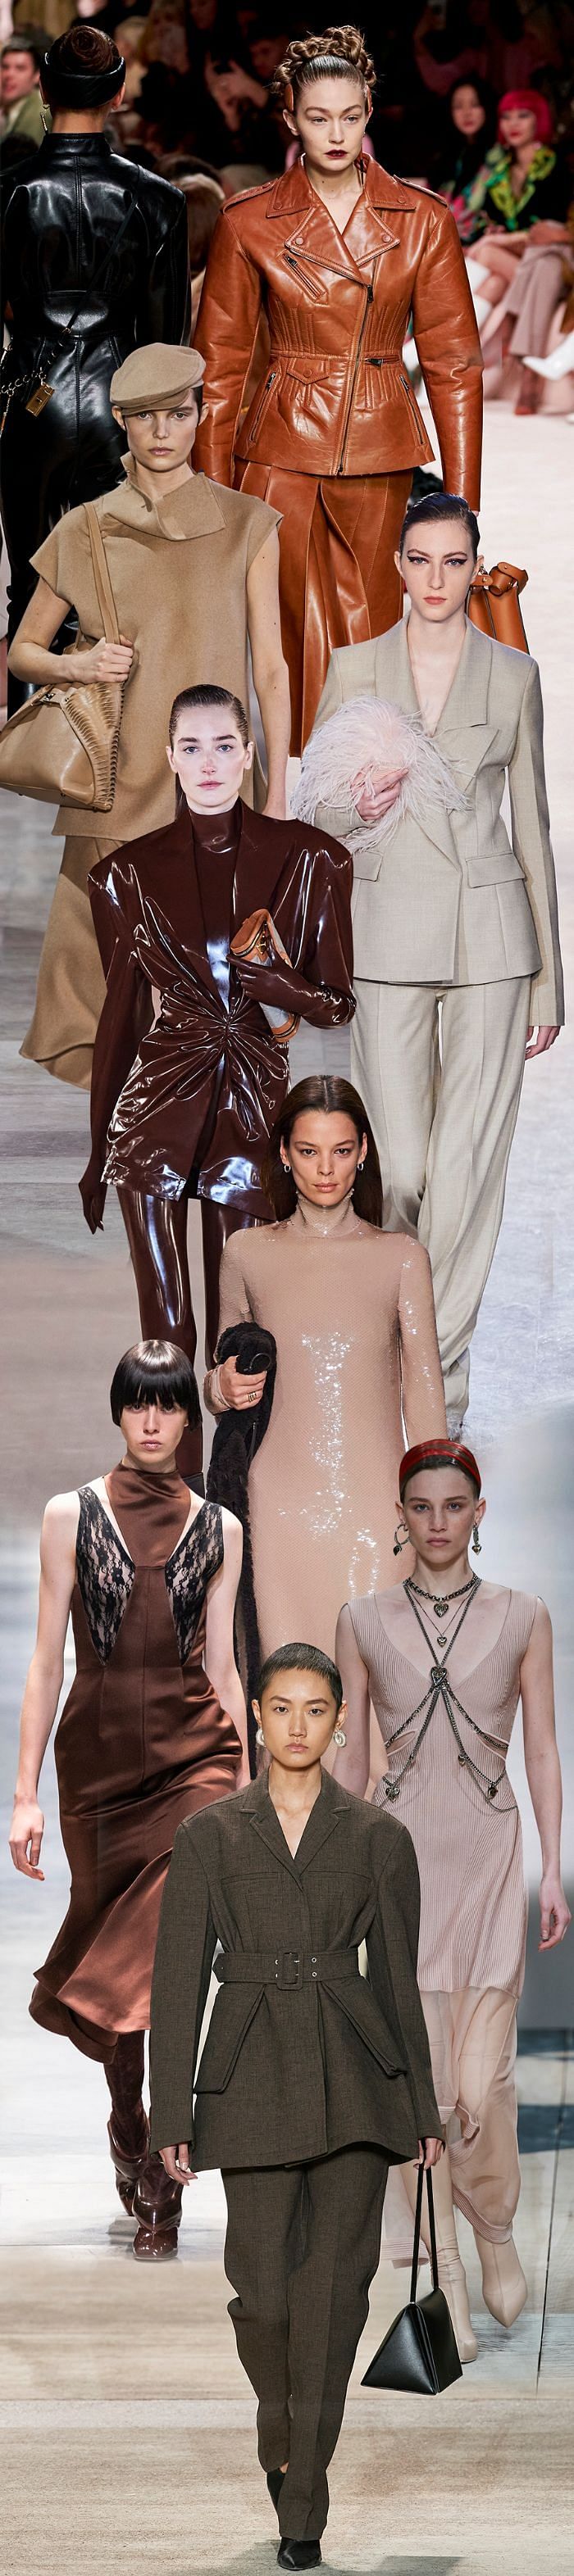 12 Standout Fashion Trends From The Fall 2020 Runways